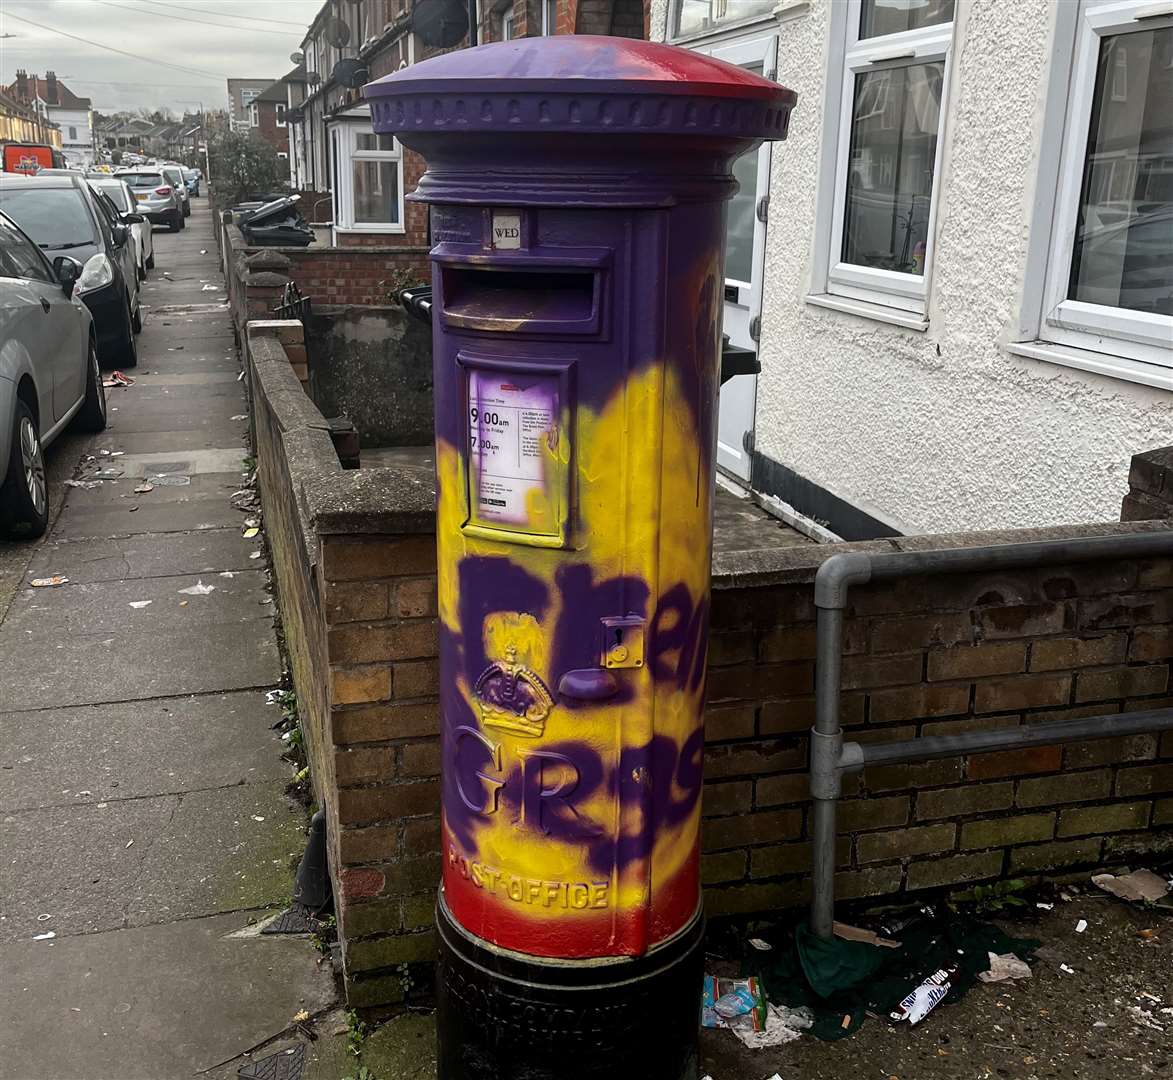 This post box in St Vincent's Road has been painted to look like a Cadbury Creme Egg